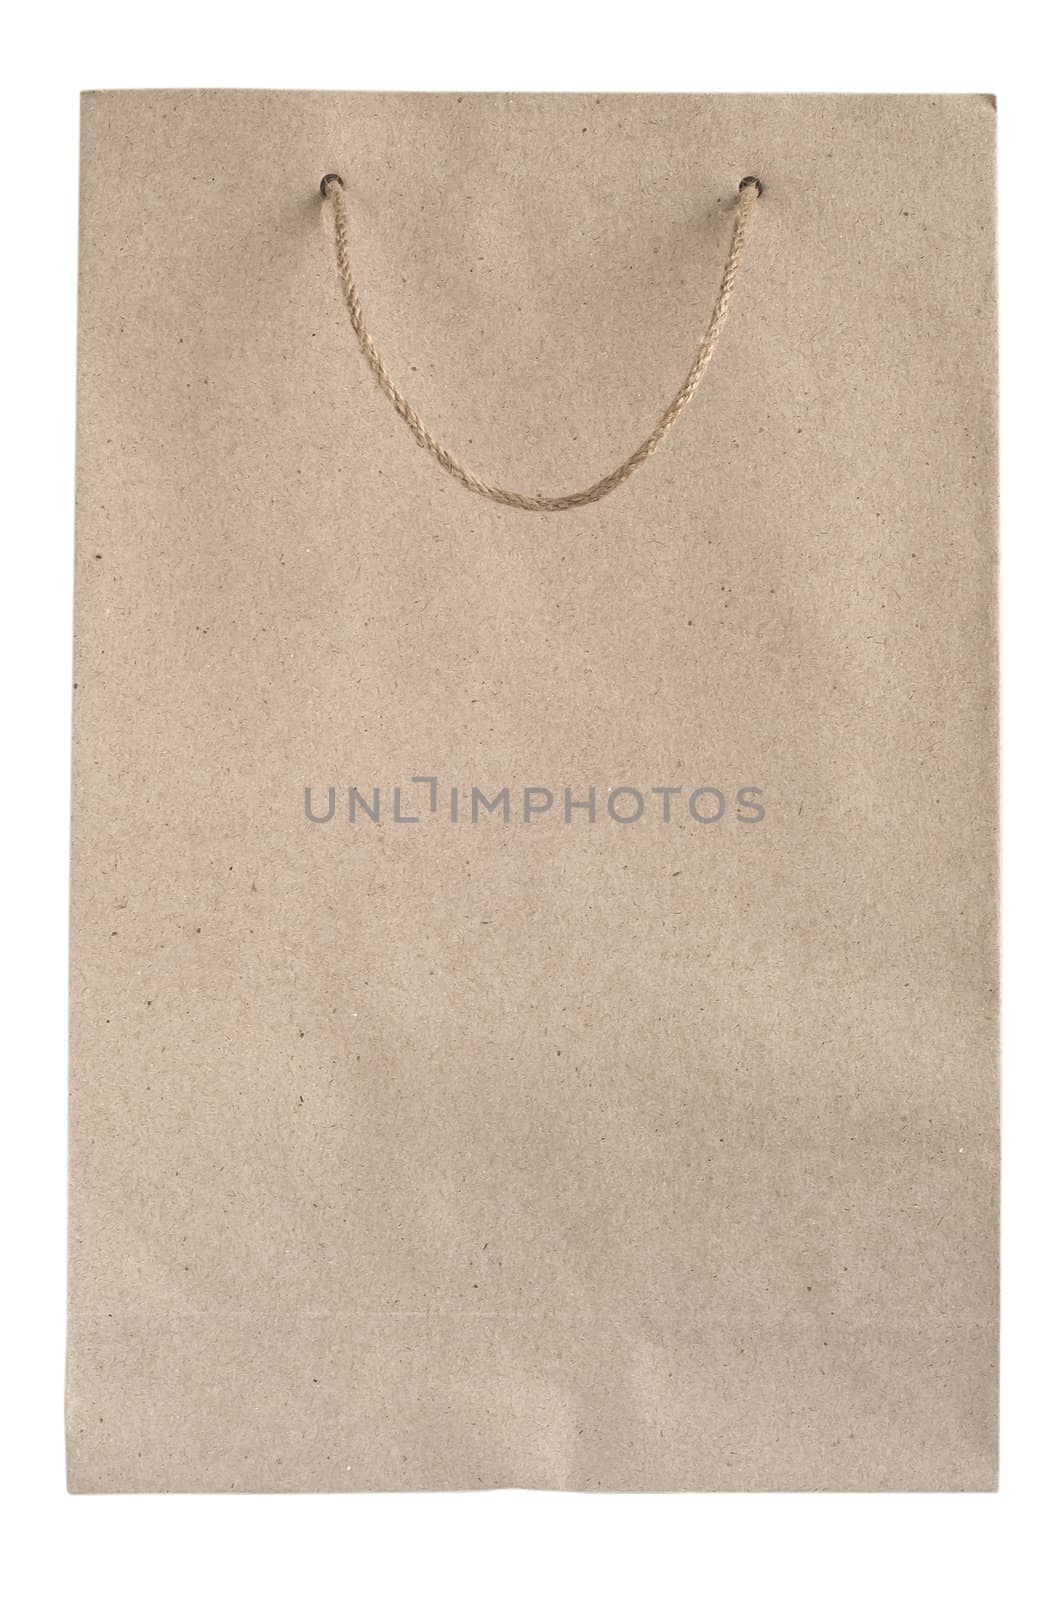 Recycled paper bag with hemp rope handles isolated on white background







Recycled paper bag with hemp rope handles isolated on white background